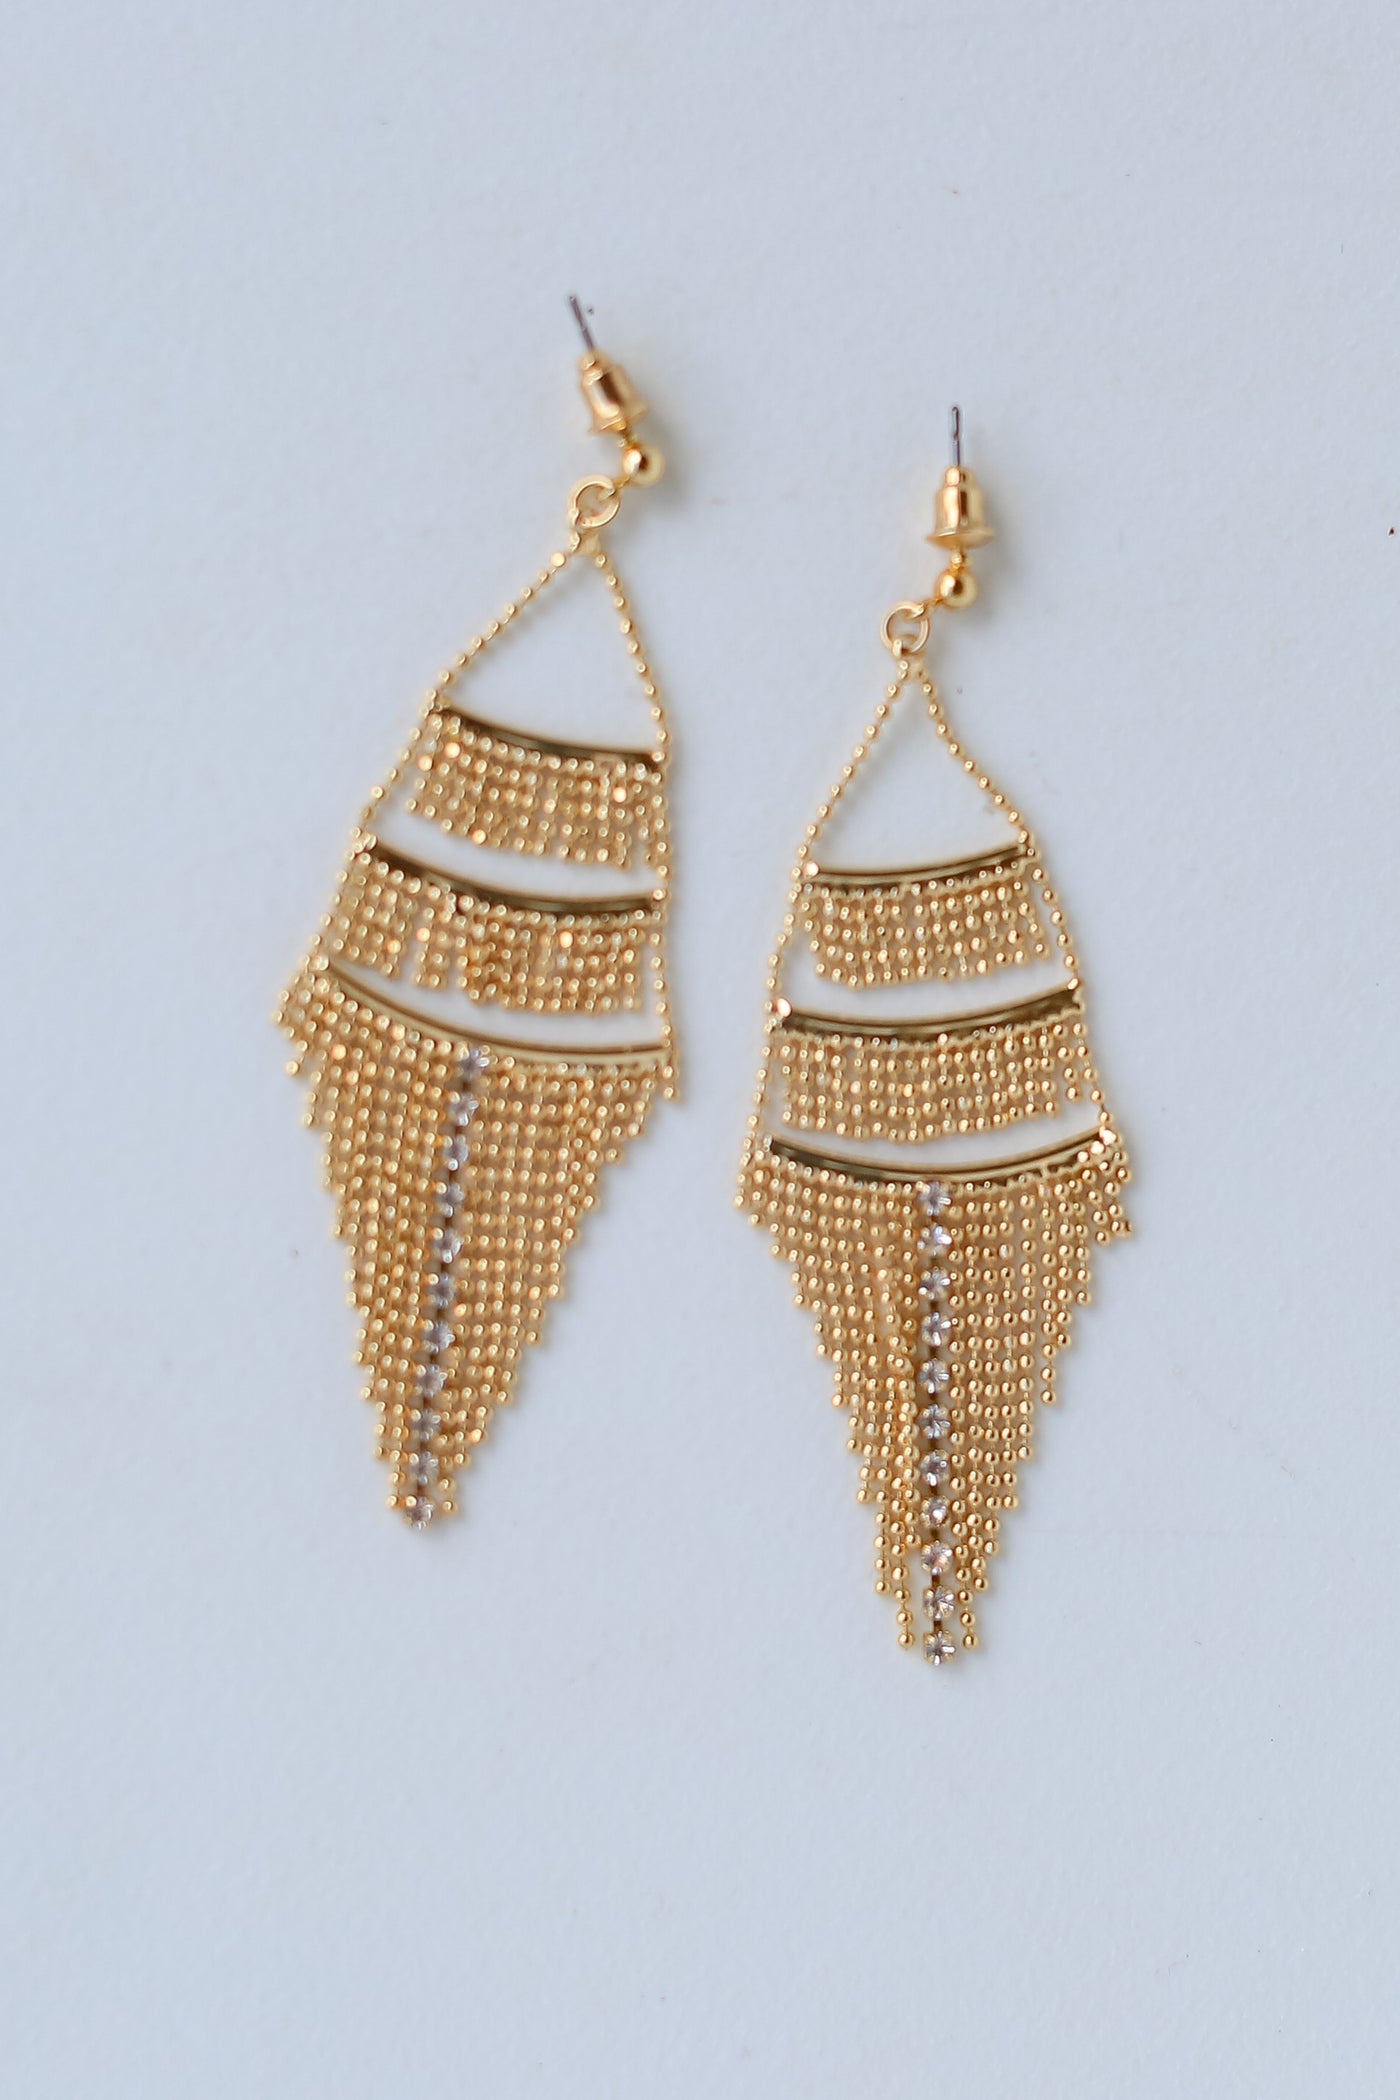 Gold Tiered Fringe Drop Earrings close up